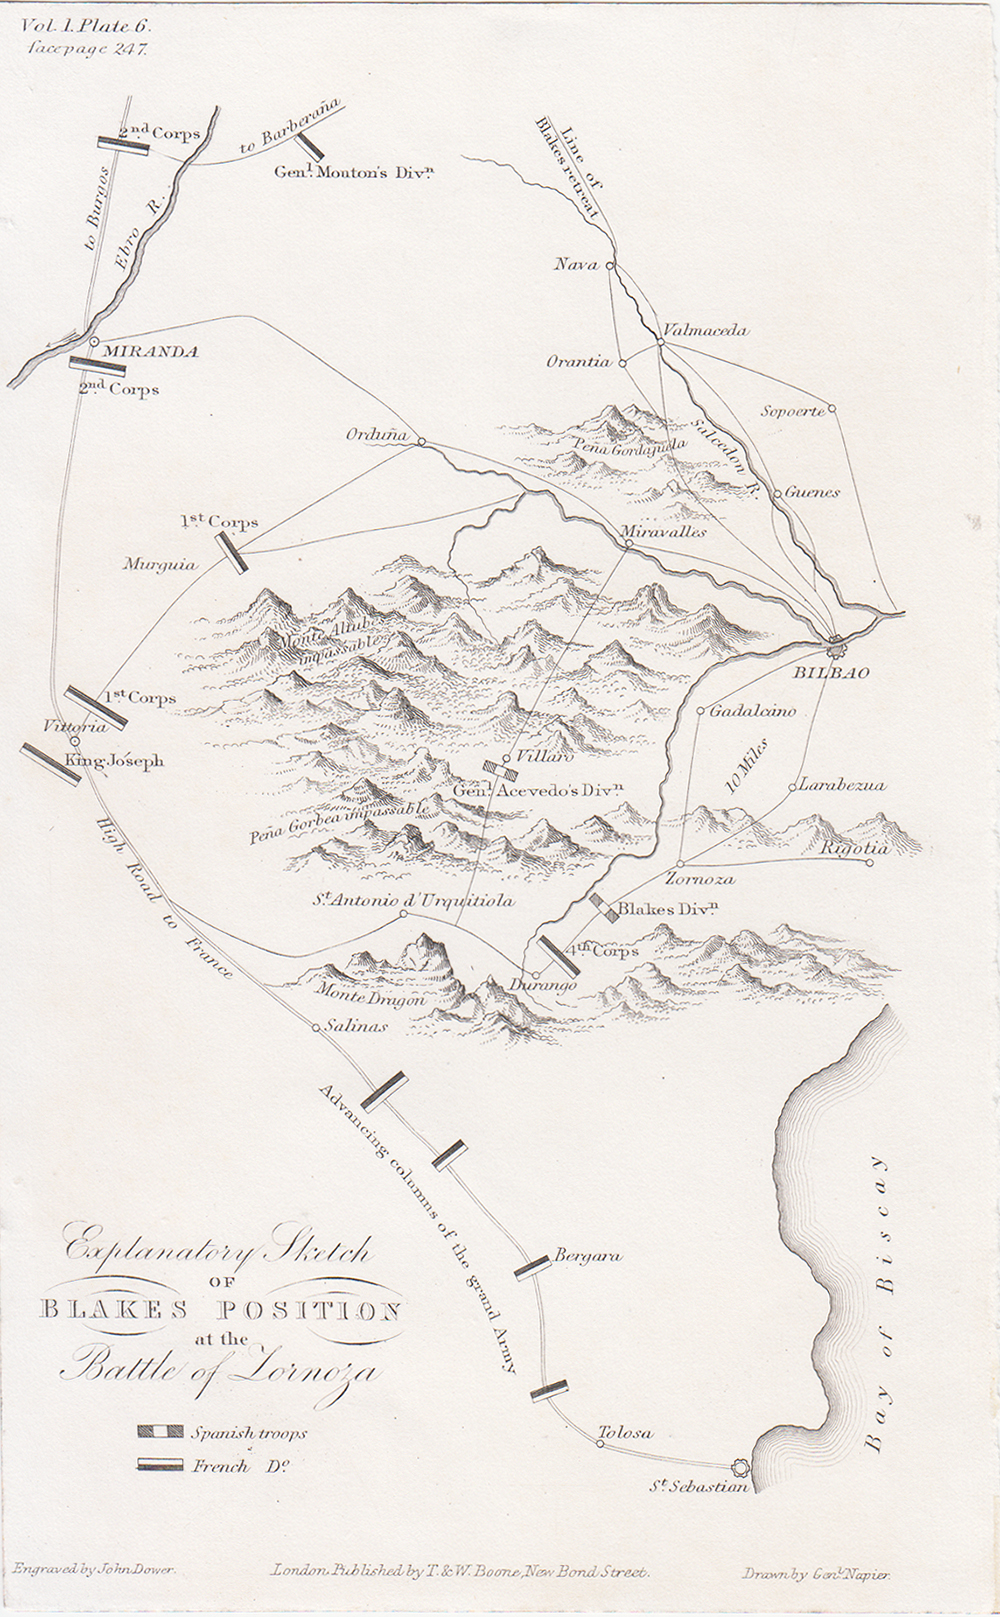 Explanatory Sketch of Blake's Position at the Battle of Lorenza